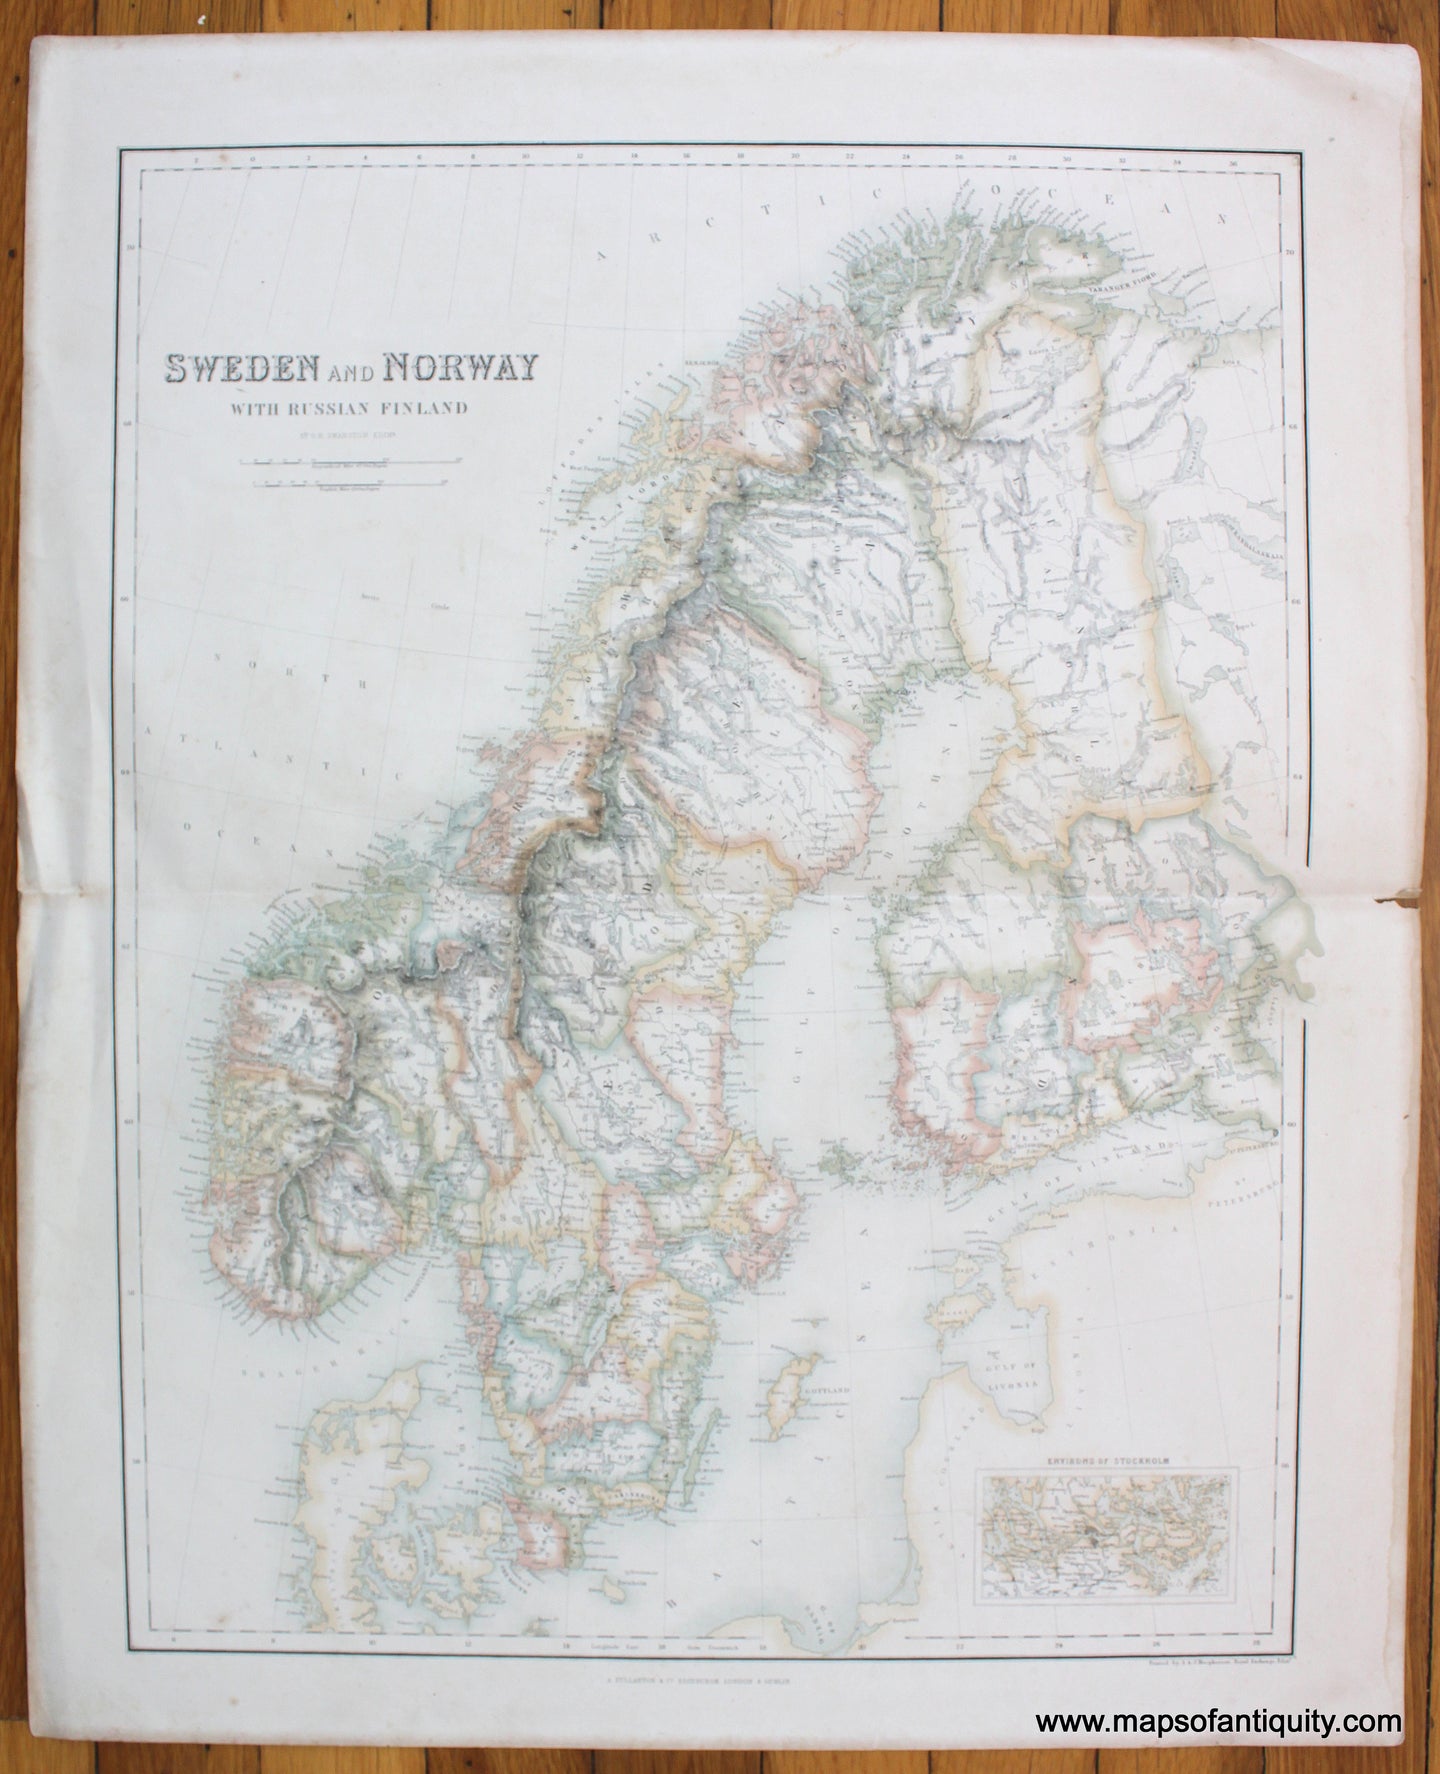 Antique-Map-Sweden-and-Norway-with-Russian-Finland-c.-1860-Swanston-Fullarton-Scandinavia-Denmark-&-Iceland-1800s-19th-century-Maps-of-Antiquity